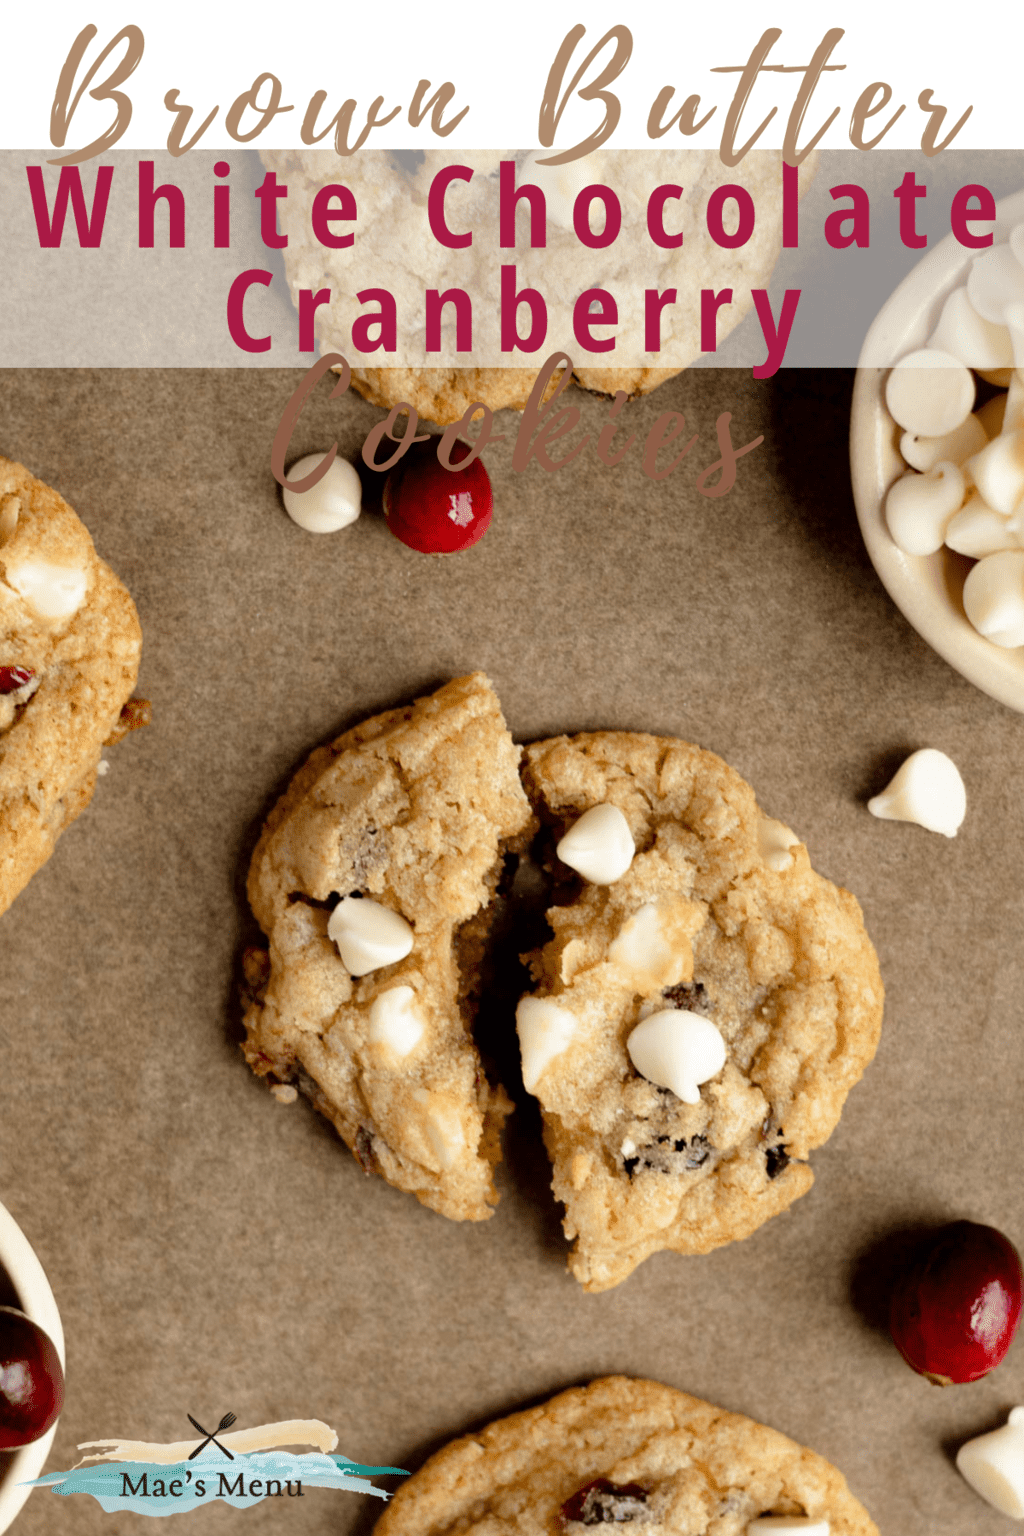 A pinterest pin for brown butter white chocolate cranberry cookies with a photo of the cookies on a cookie sheet with one of the cookies split in half